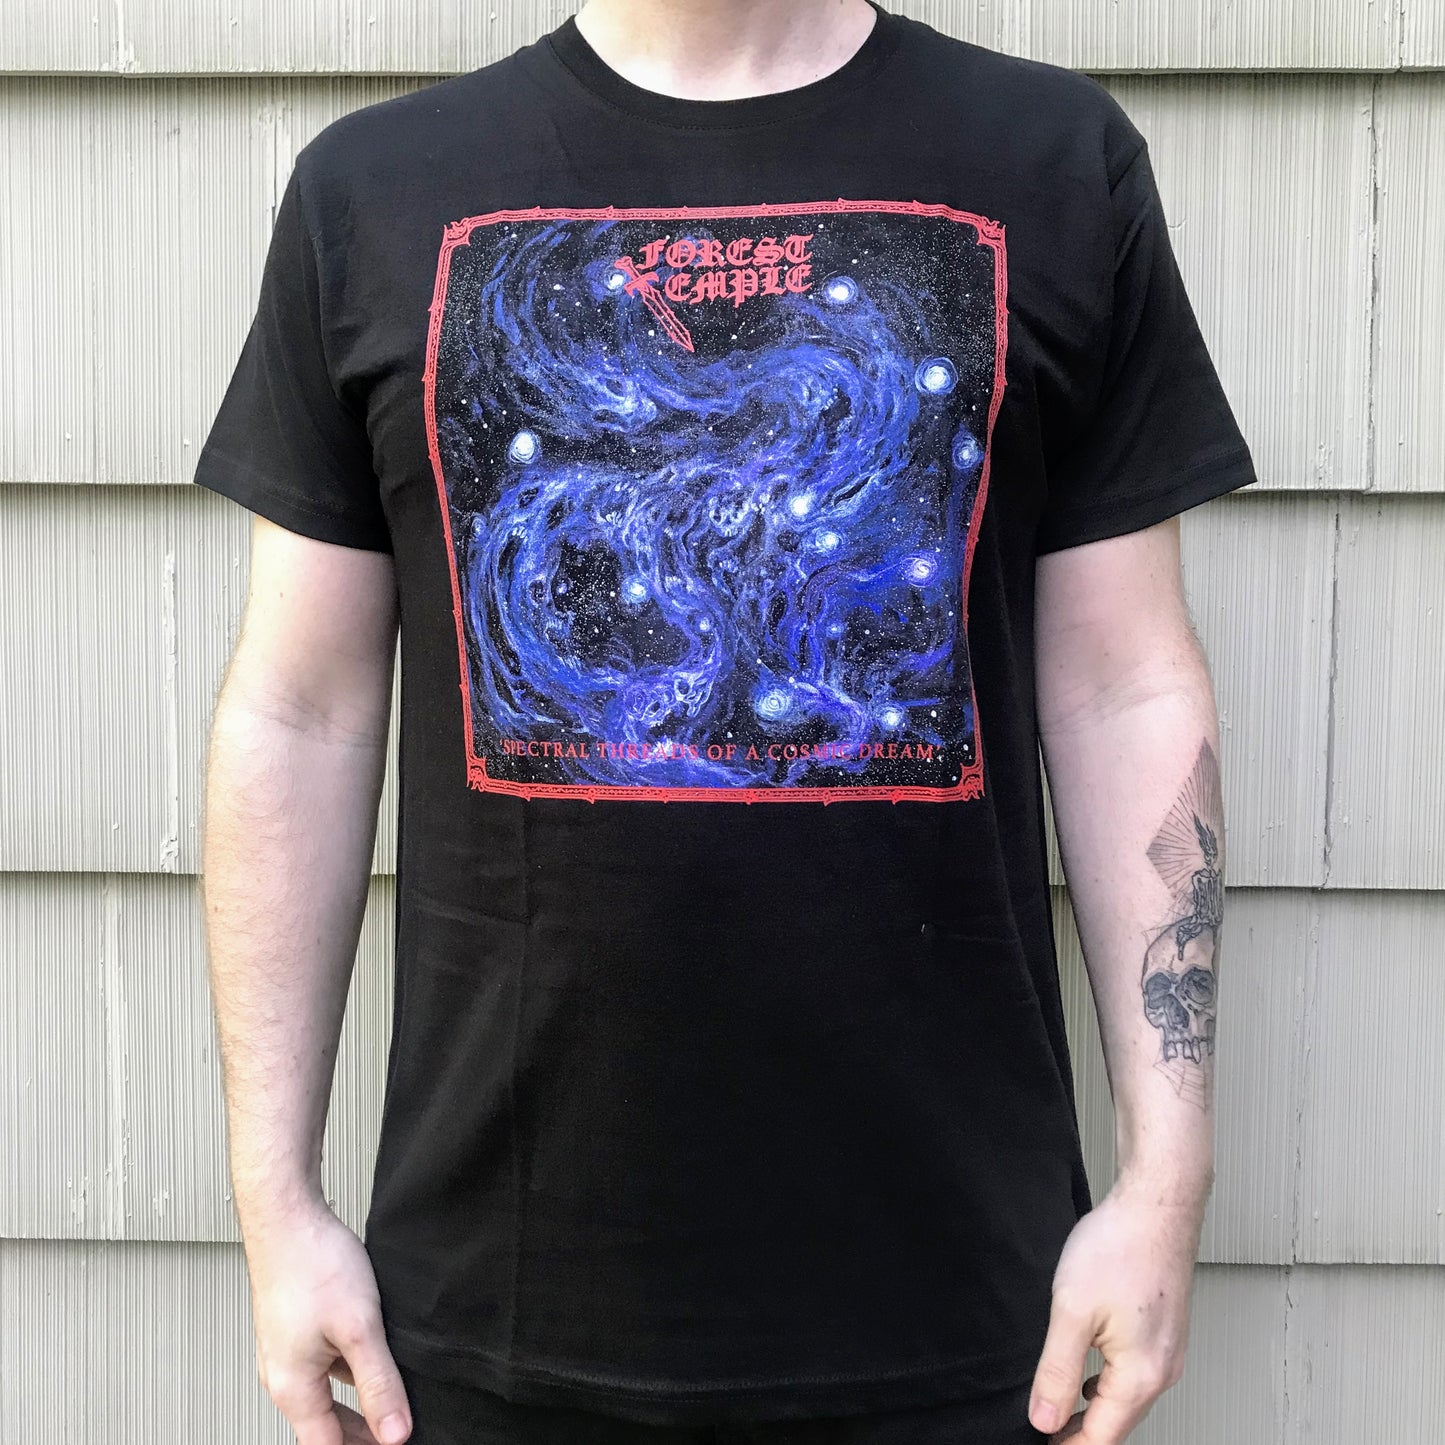 [SOLD OUT] FOREST TEMPLE "Spectral Threads..." T-Shirt [BLACK]